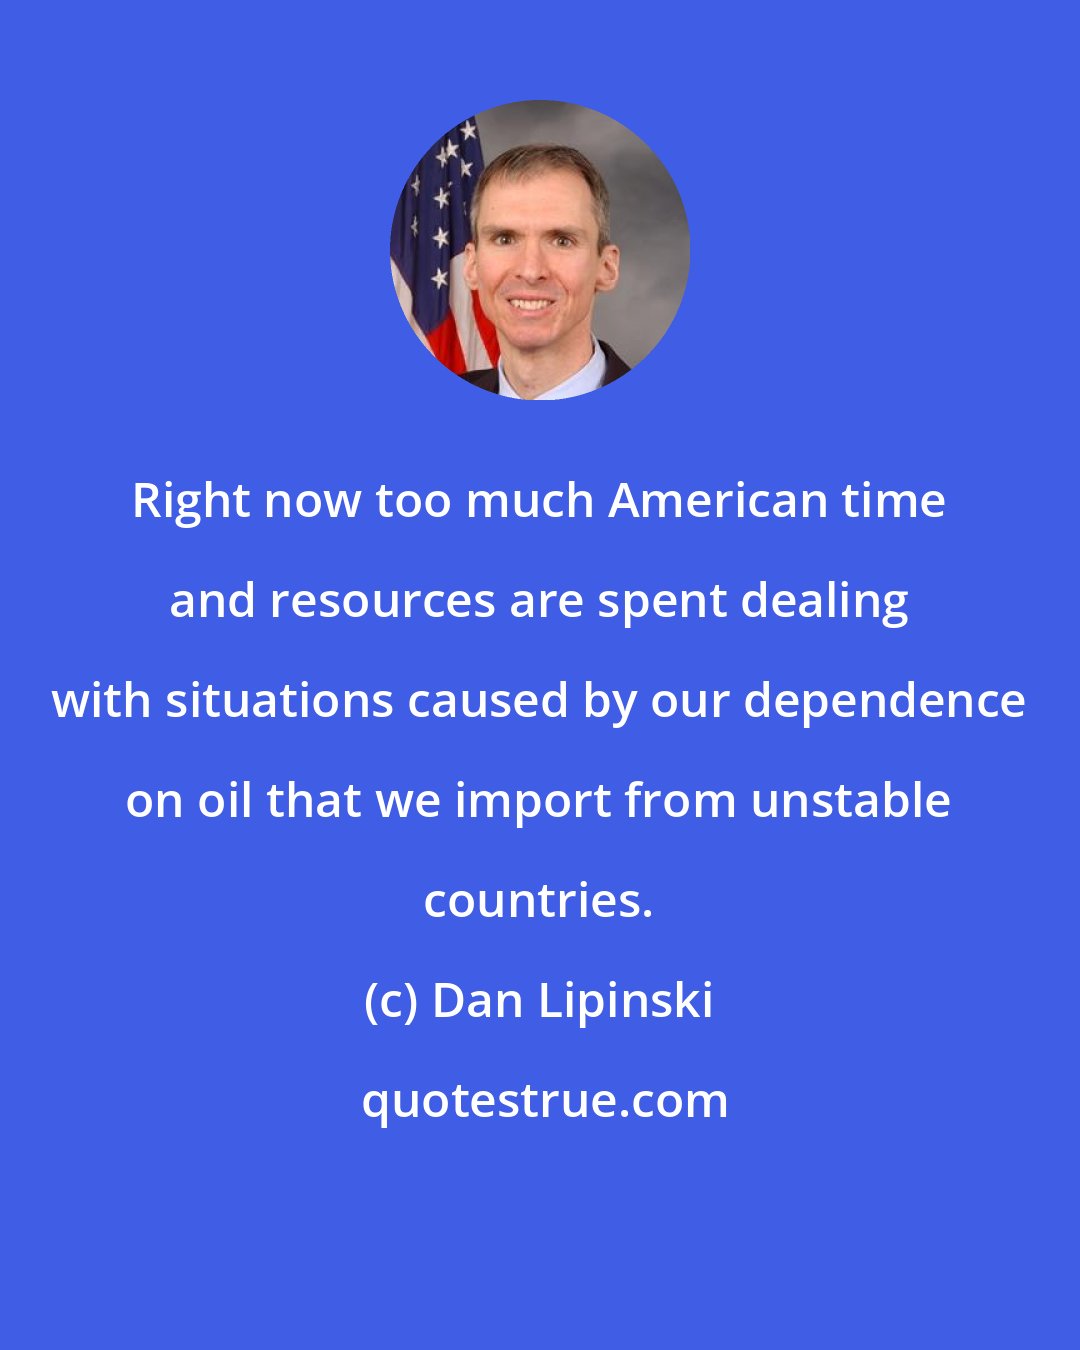 Dan Lipinski: Right now too much American time and resources are spent dealing with situations caused by our dependence on oil that we import from unstable countries.